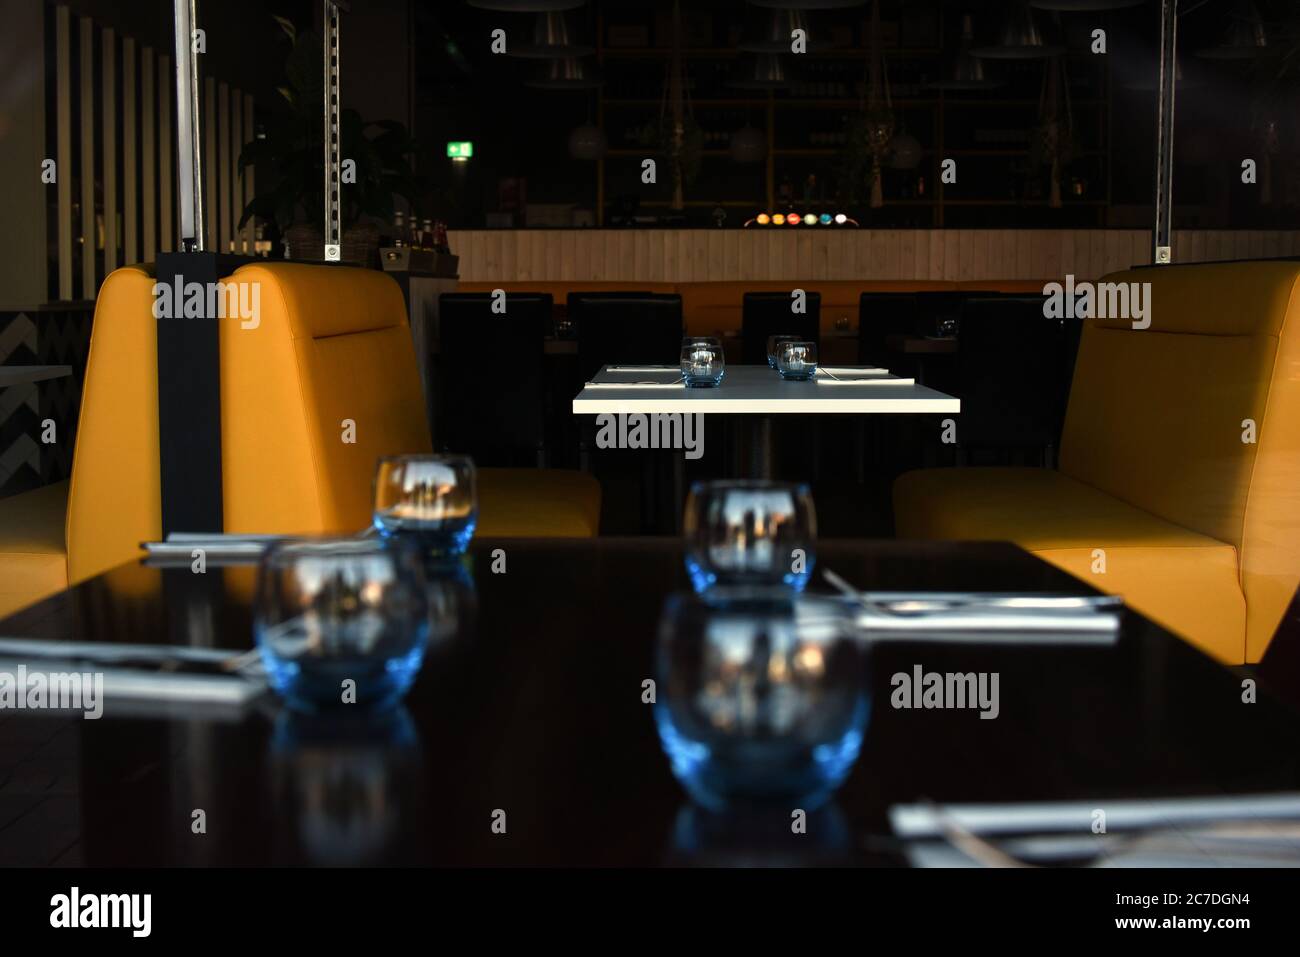 Camberley, Surrey, UK - 22 April 2020: Tables are unloved in an empty restaurant as the first Covid-19 lockdown continues in the UK Stock Photo